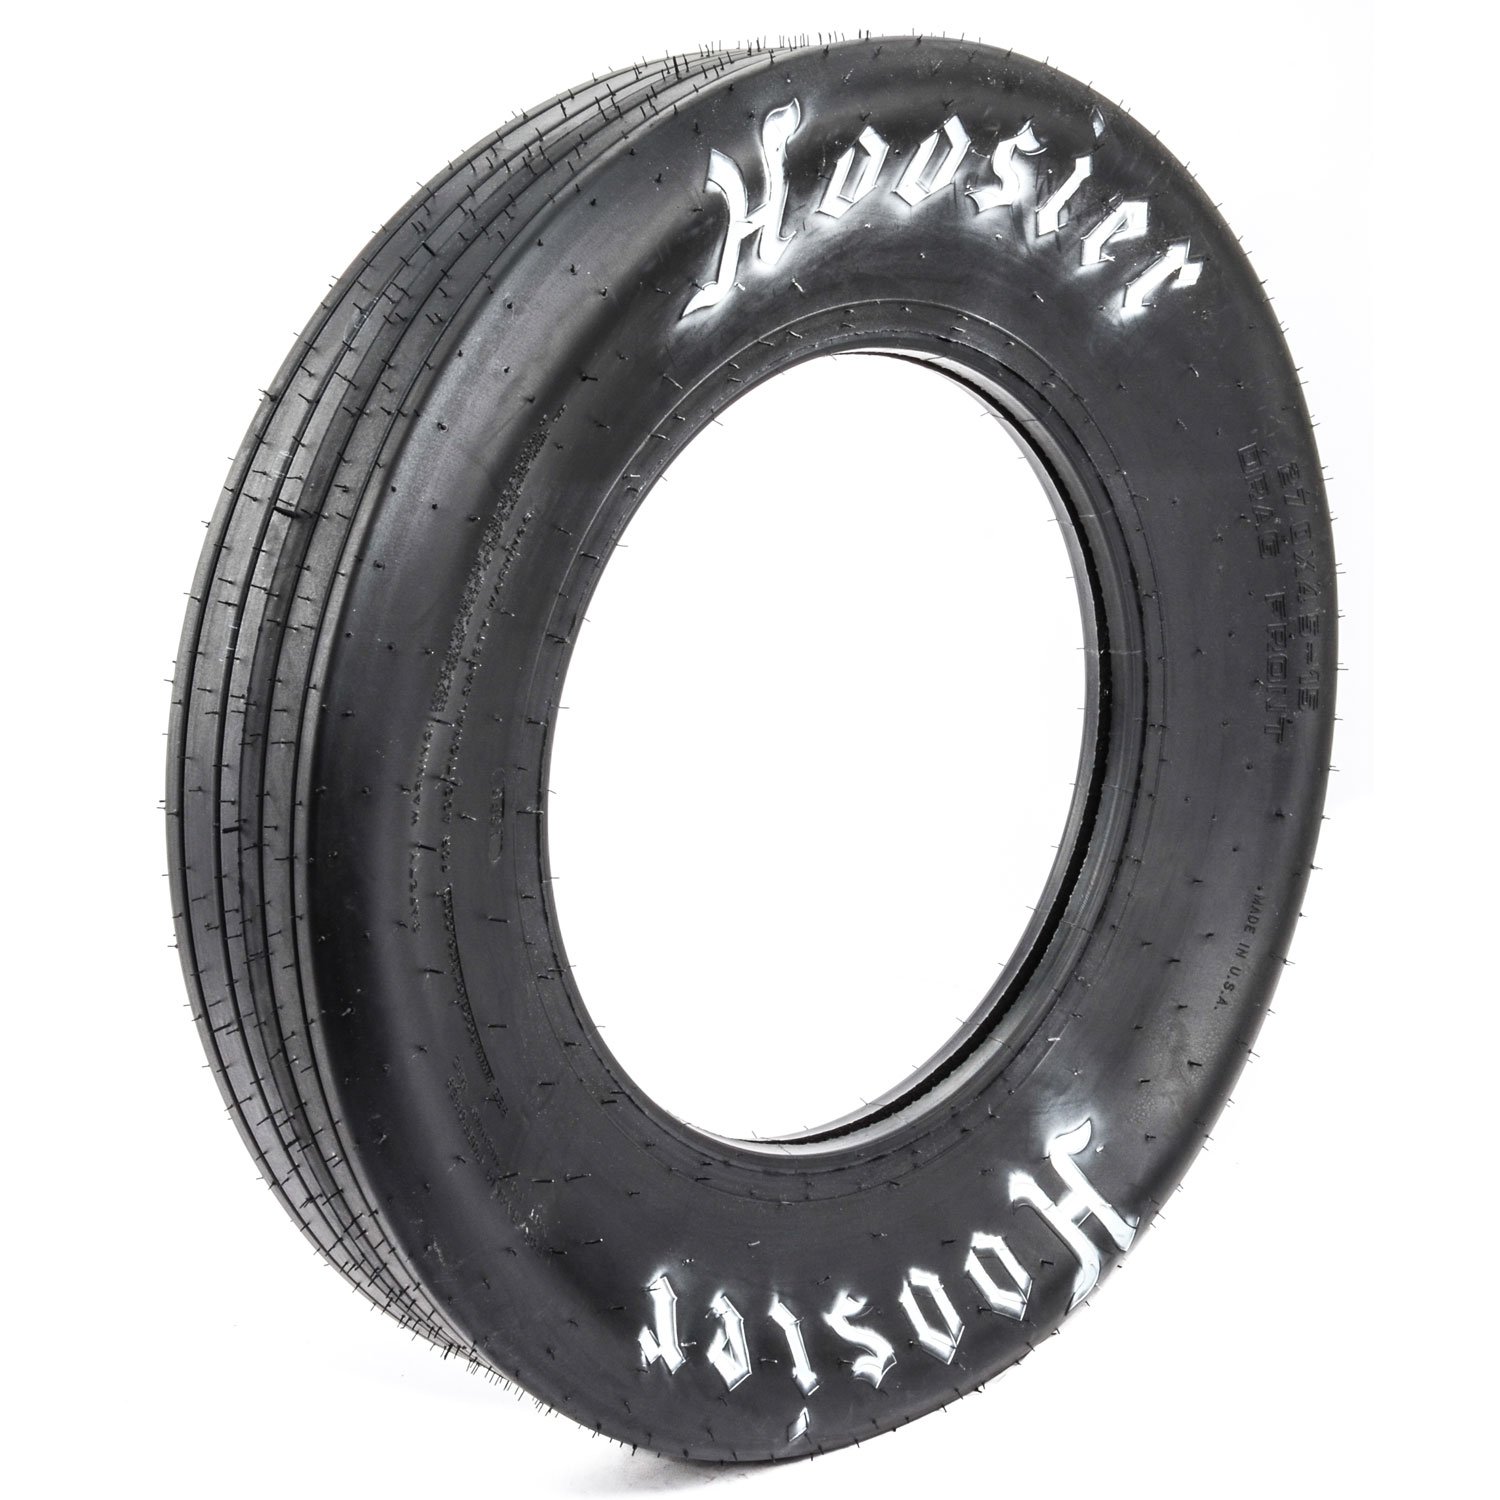 Front Drag Tire Tire Size: 27x4.5R15